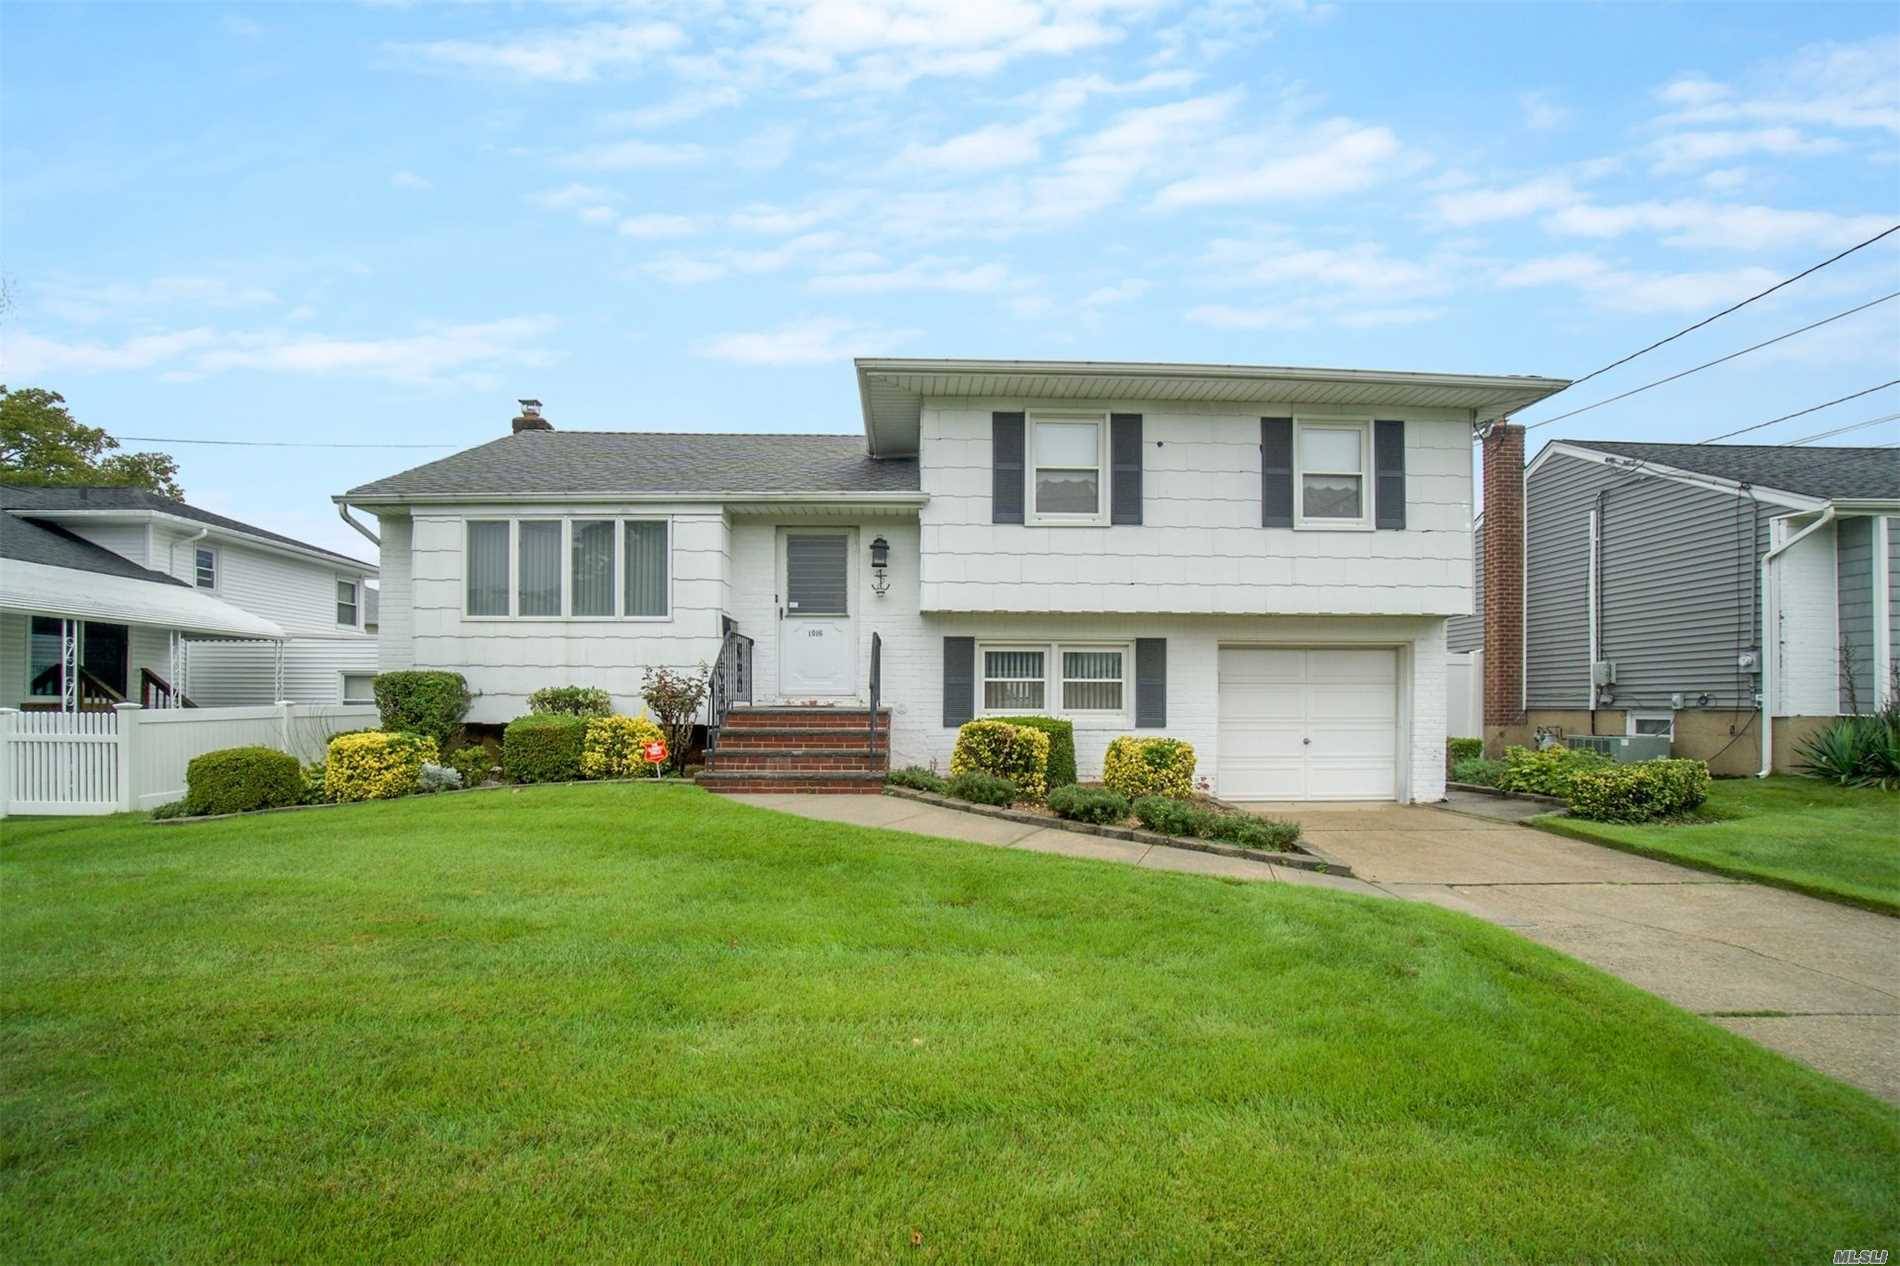 Four Level Split W/Great Curb Appeal Centrally Located To All.